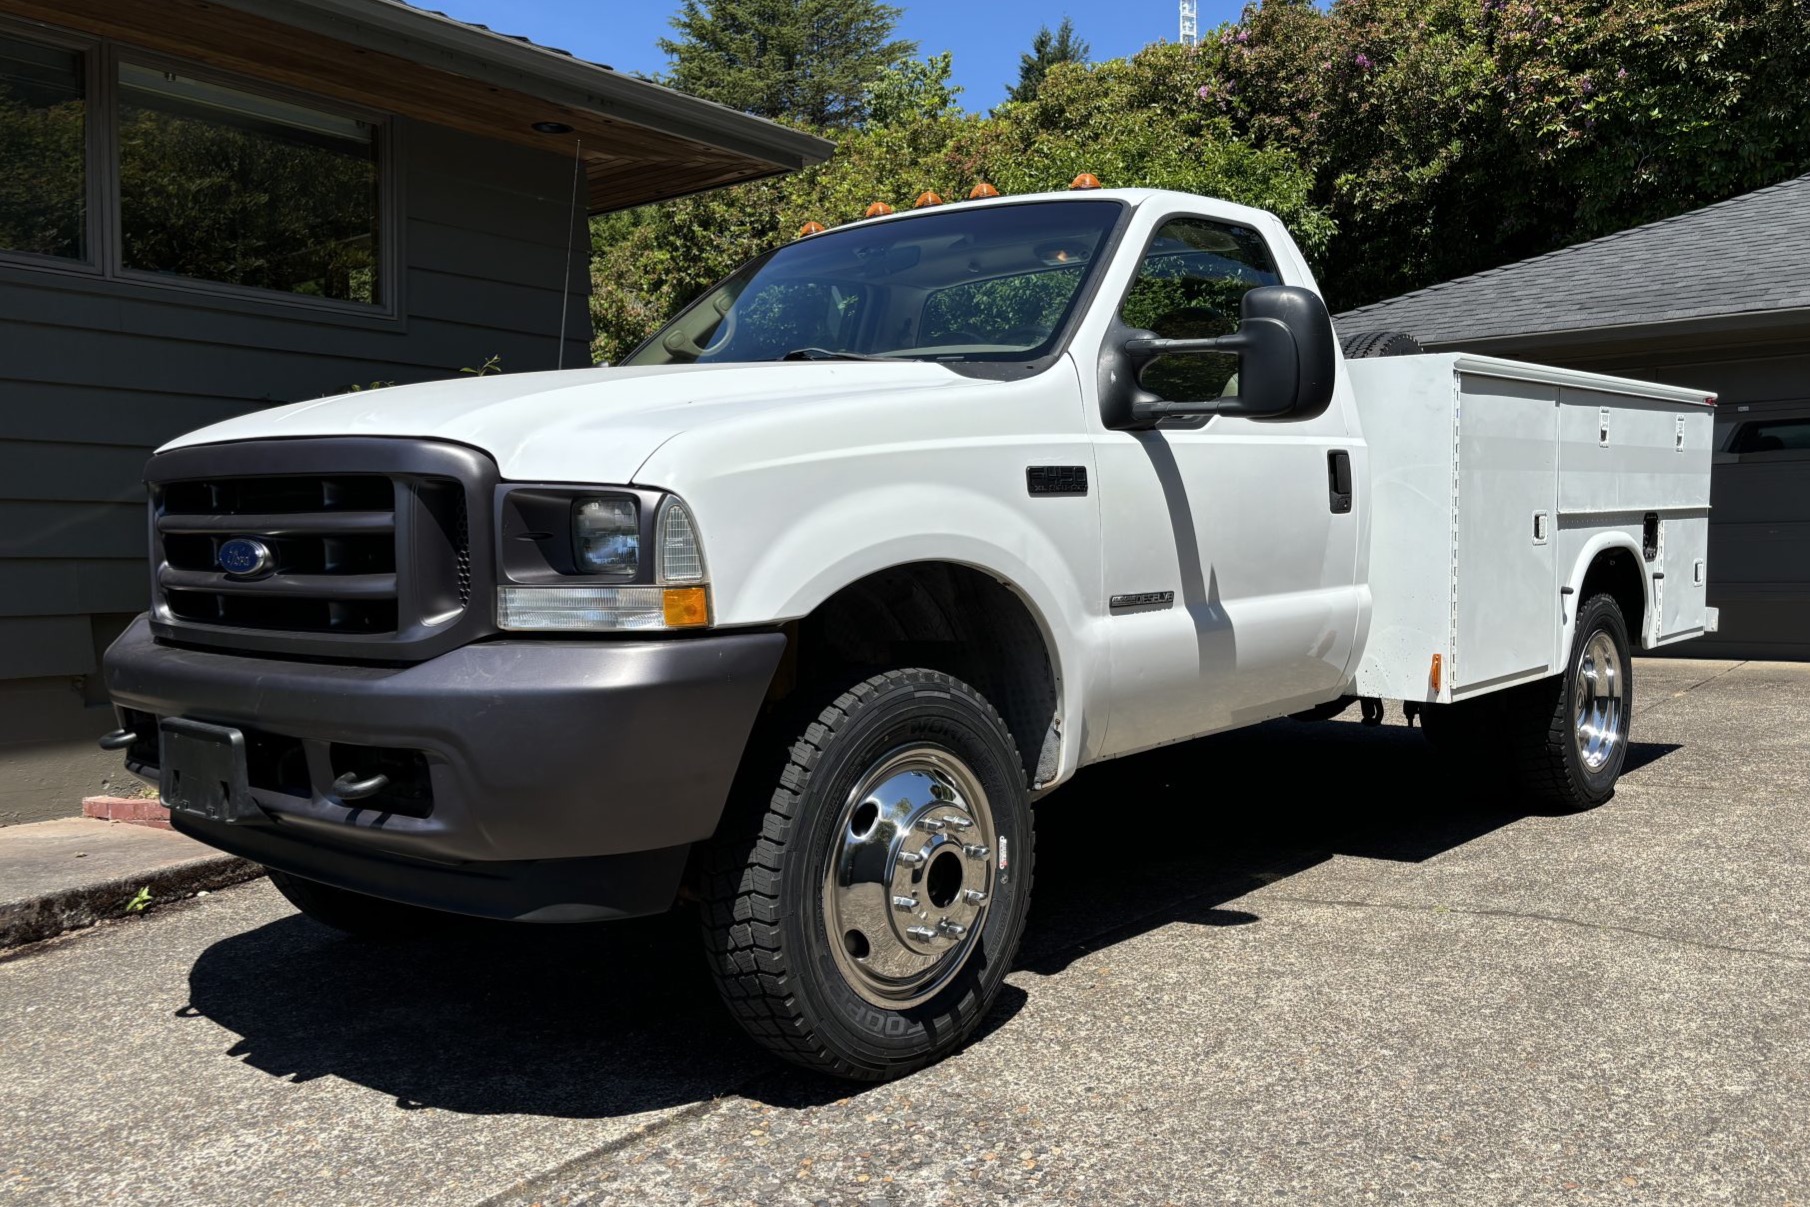 Used 2002 Ford F-450 Super Duty XL 7.3L Power Stroke Dually 4×4 6-Speed Utility Truck Review